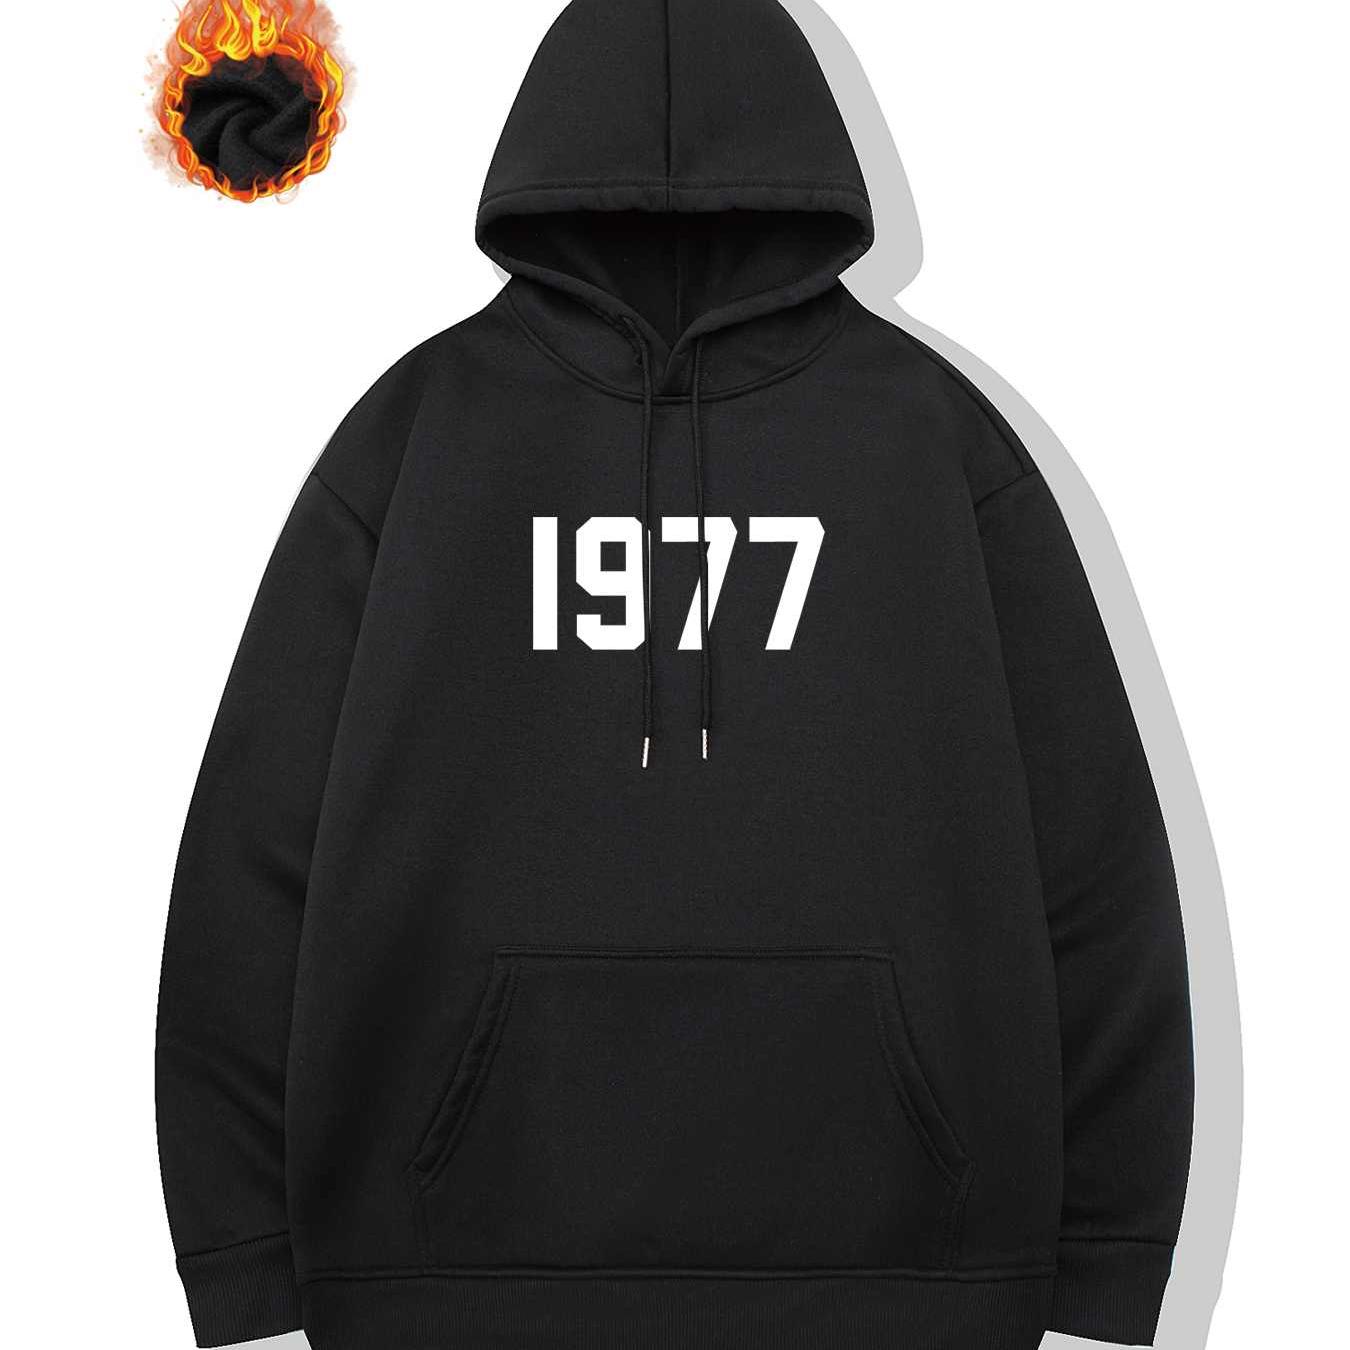 

1977 Print Hoodie, Cool Hoodies For Men, Men's Casual Graphic Design Pullover Hooded Sweatshirt With Kangaroo Pocket Streetwear For Winter Fall, As Gifts